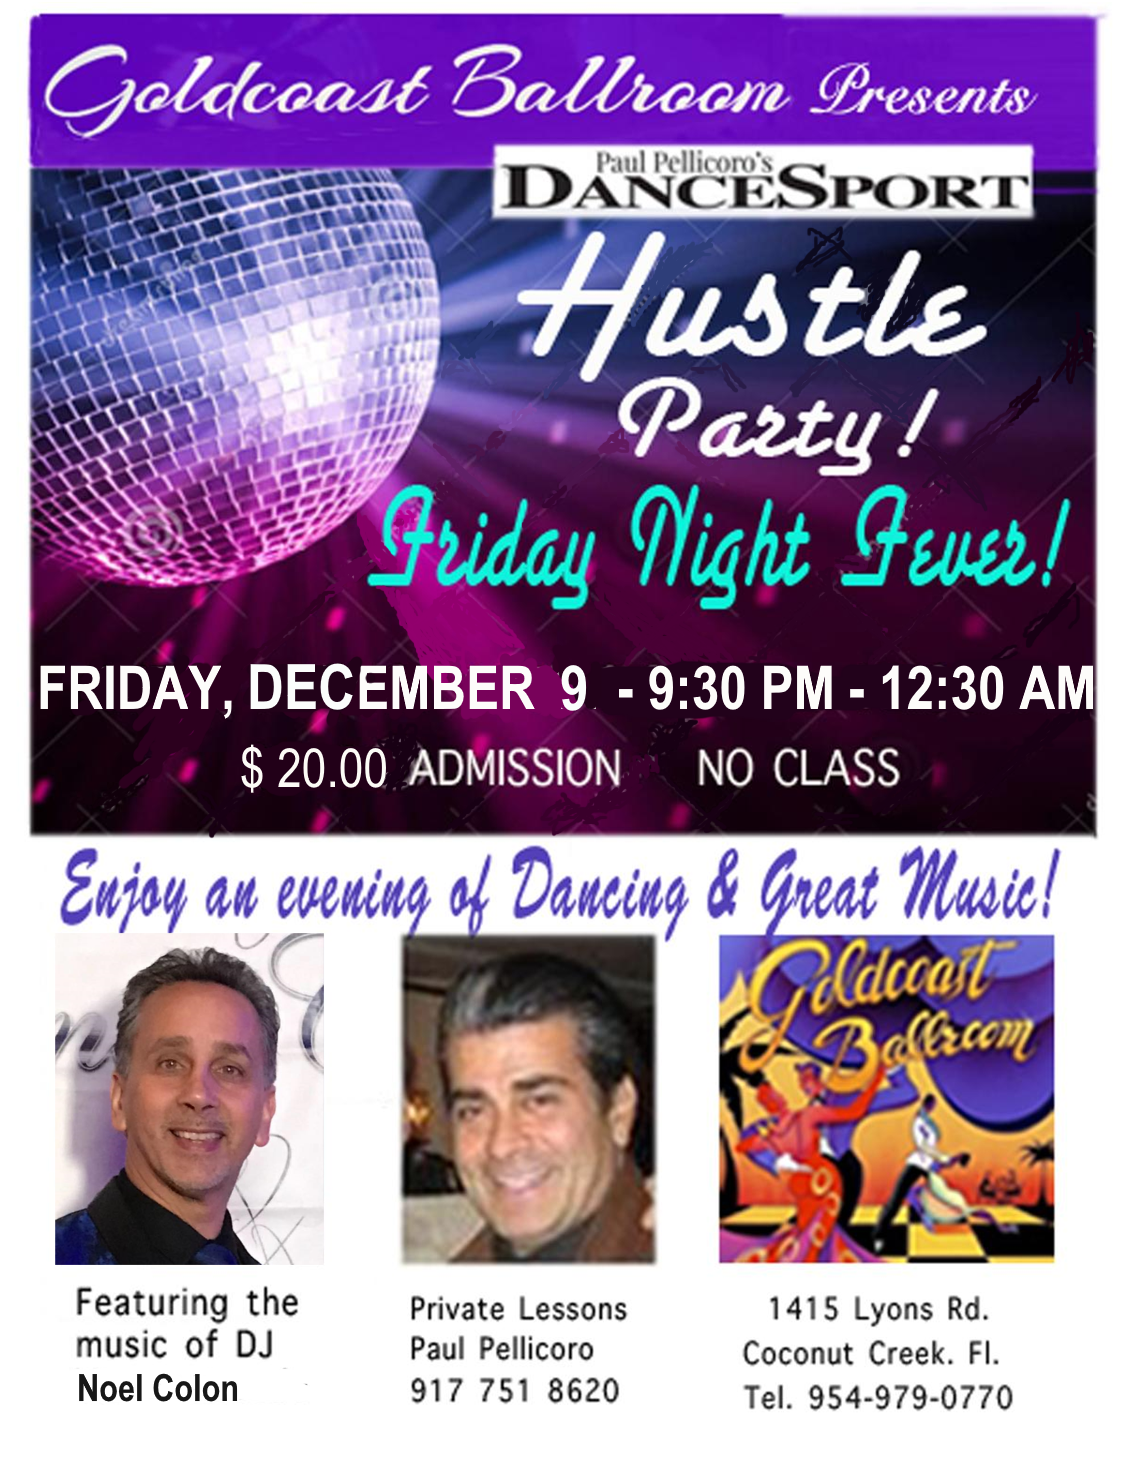 Friday Night Hustle Party Hosted by Paul Pellicoro! - Friday, December 9 - 9:30 PM - 12:30 AM